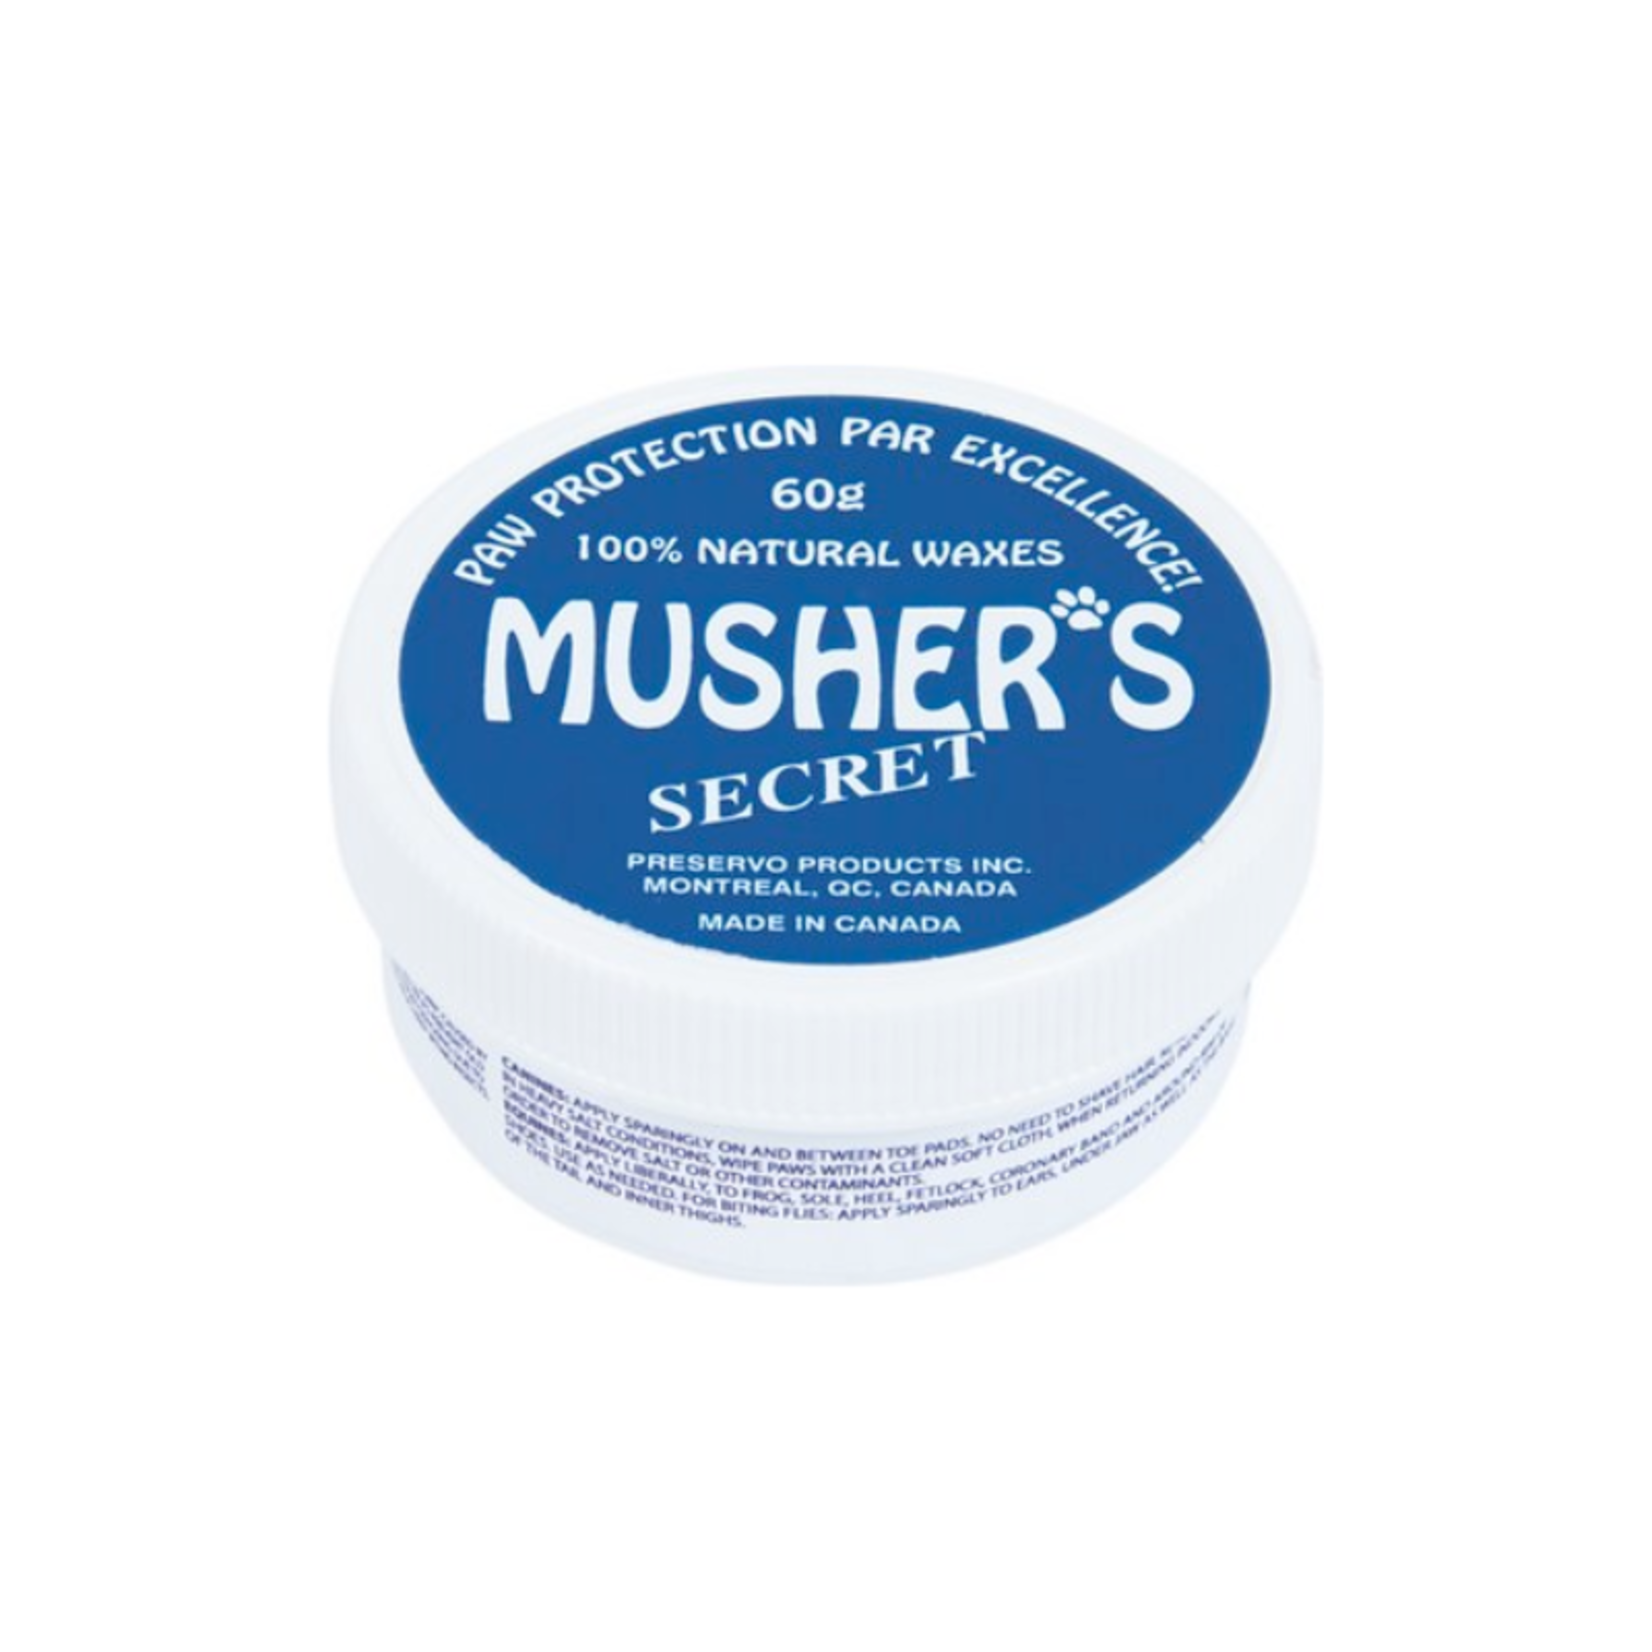 Musher's Secret Musher's Secret - Natural Wax Paw Protection for Cold or Heat